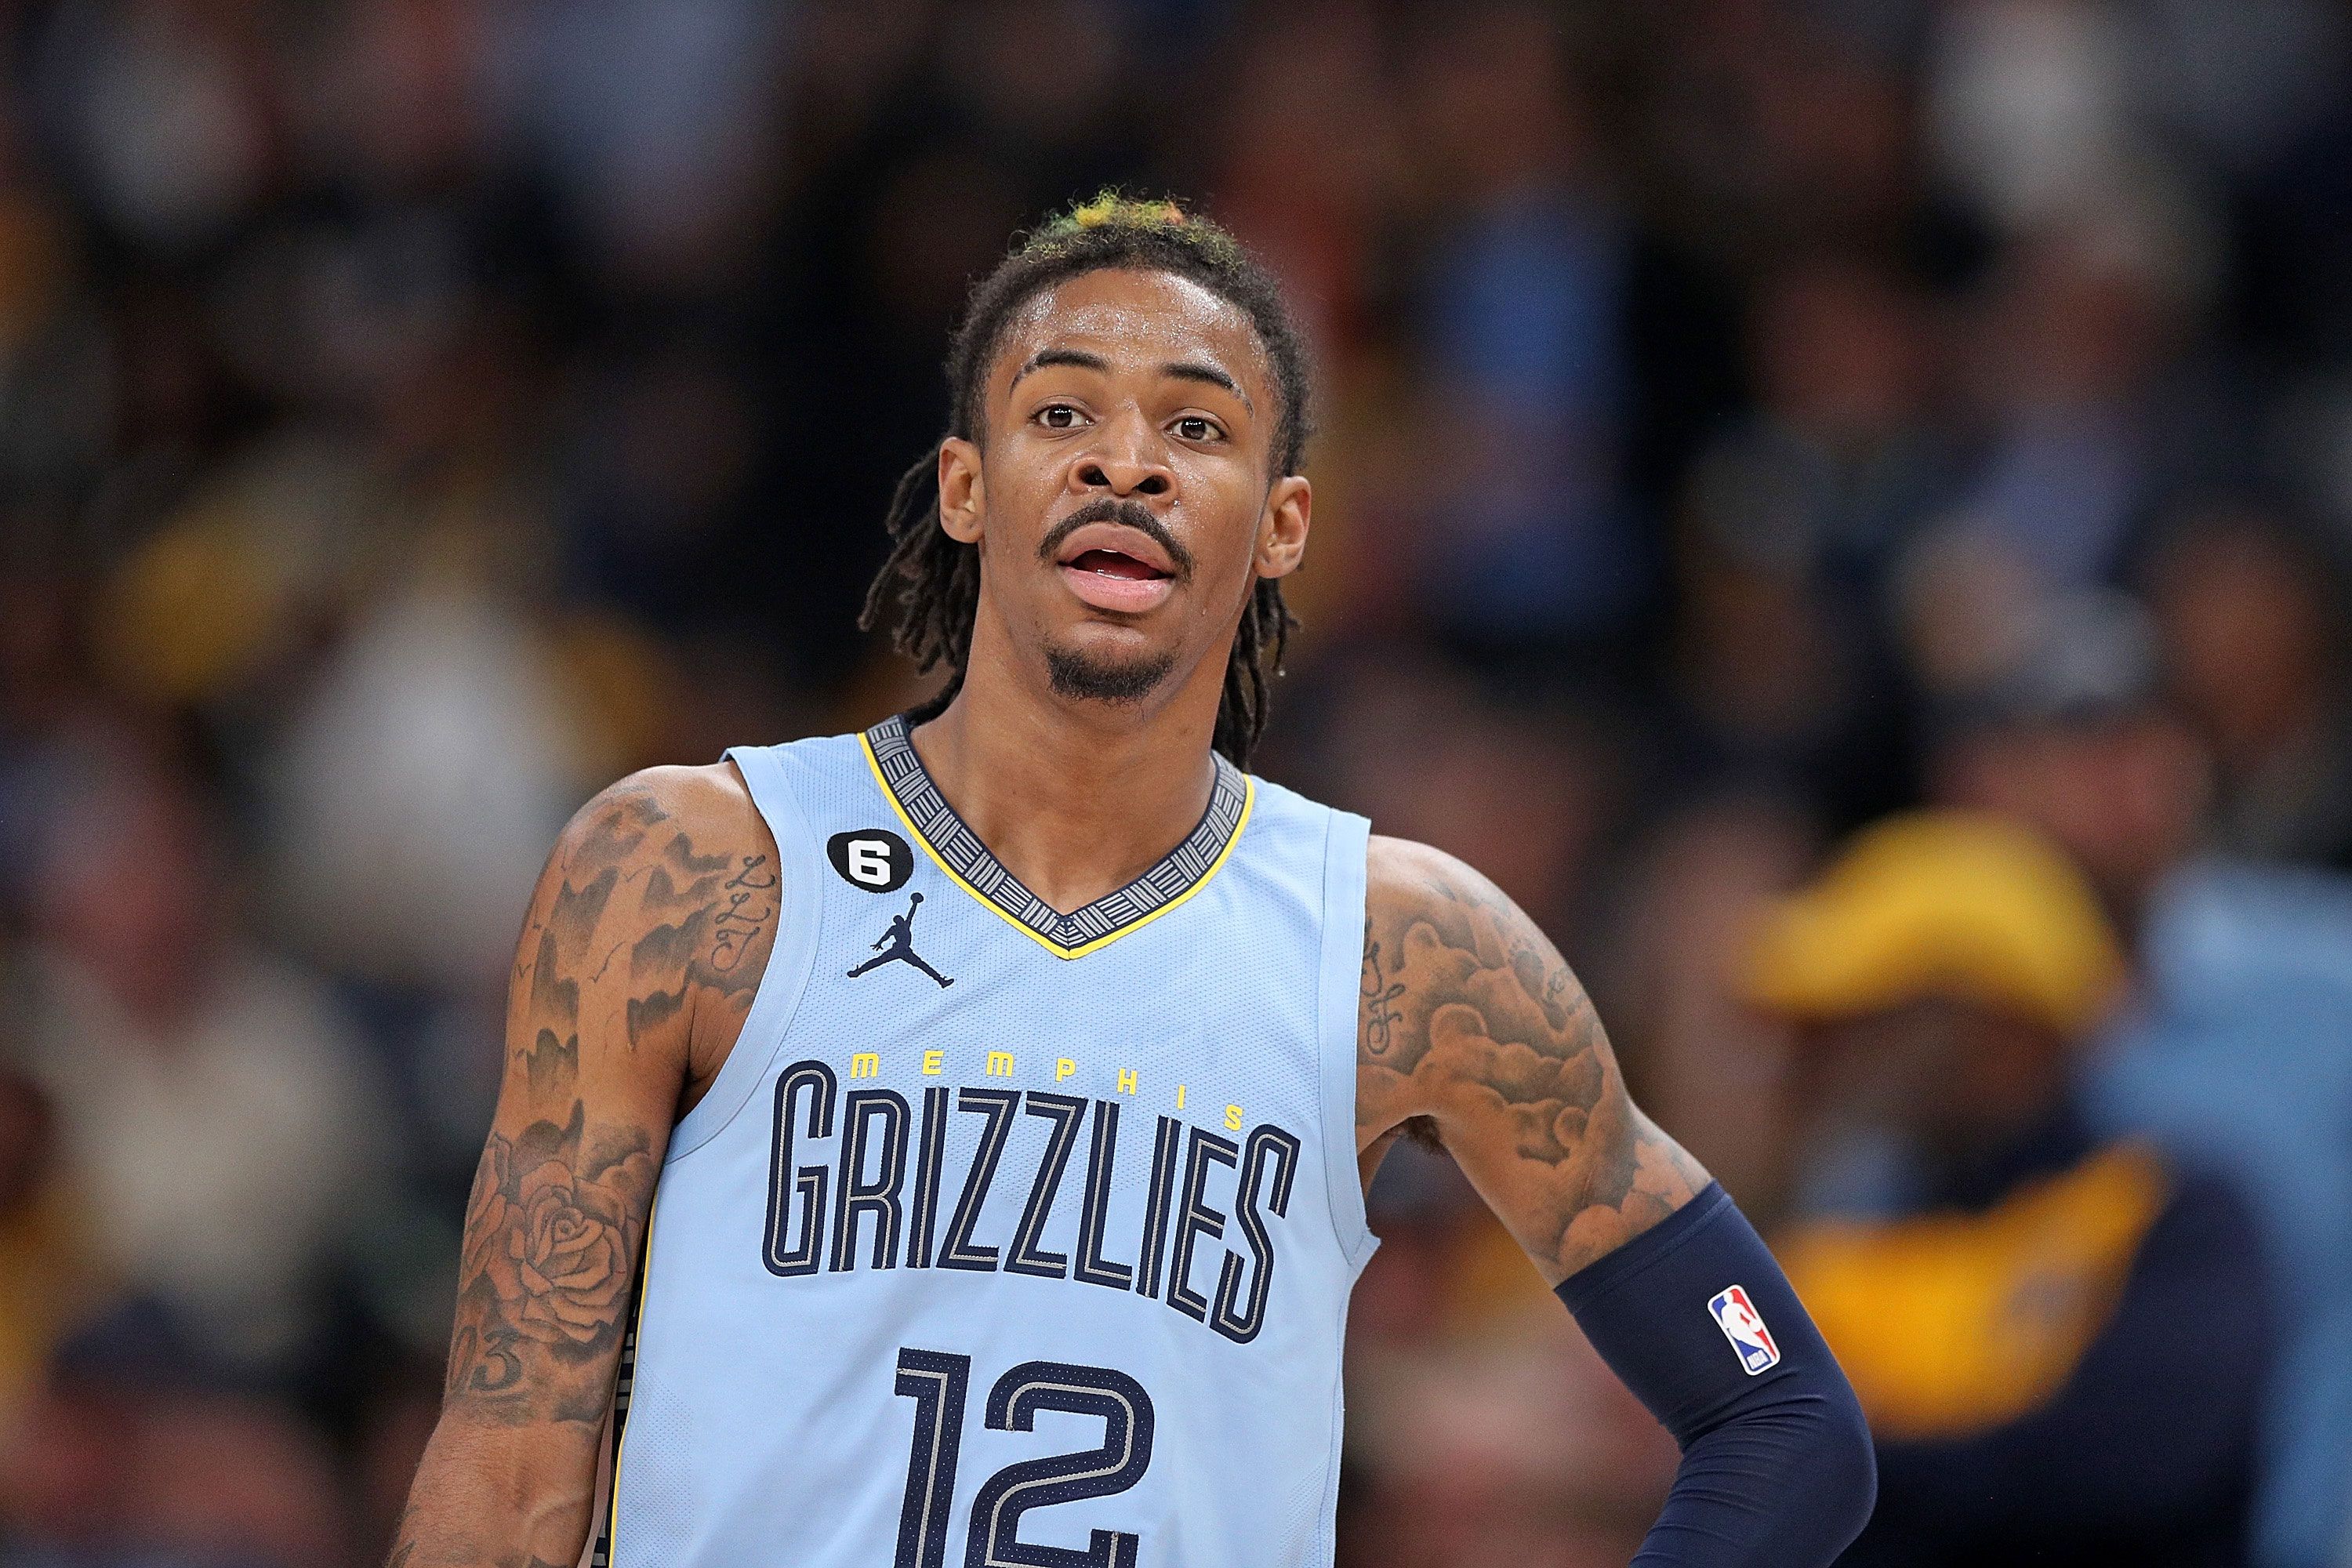 Grizzlies star Ja Morant pops up at youth basketball camp in